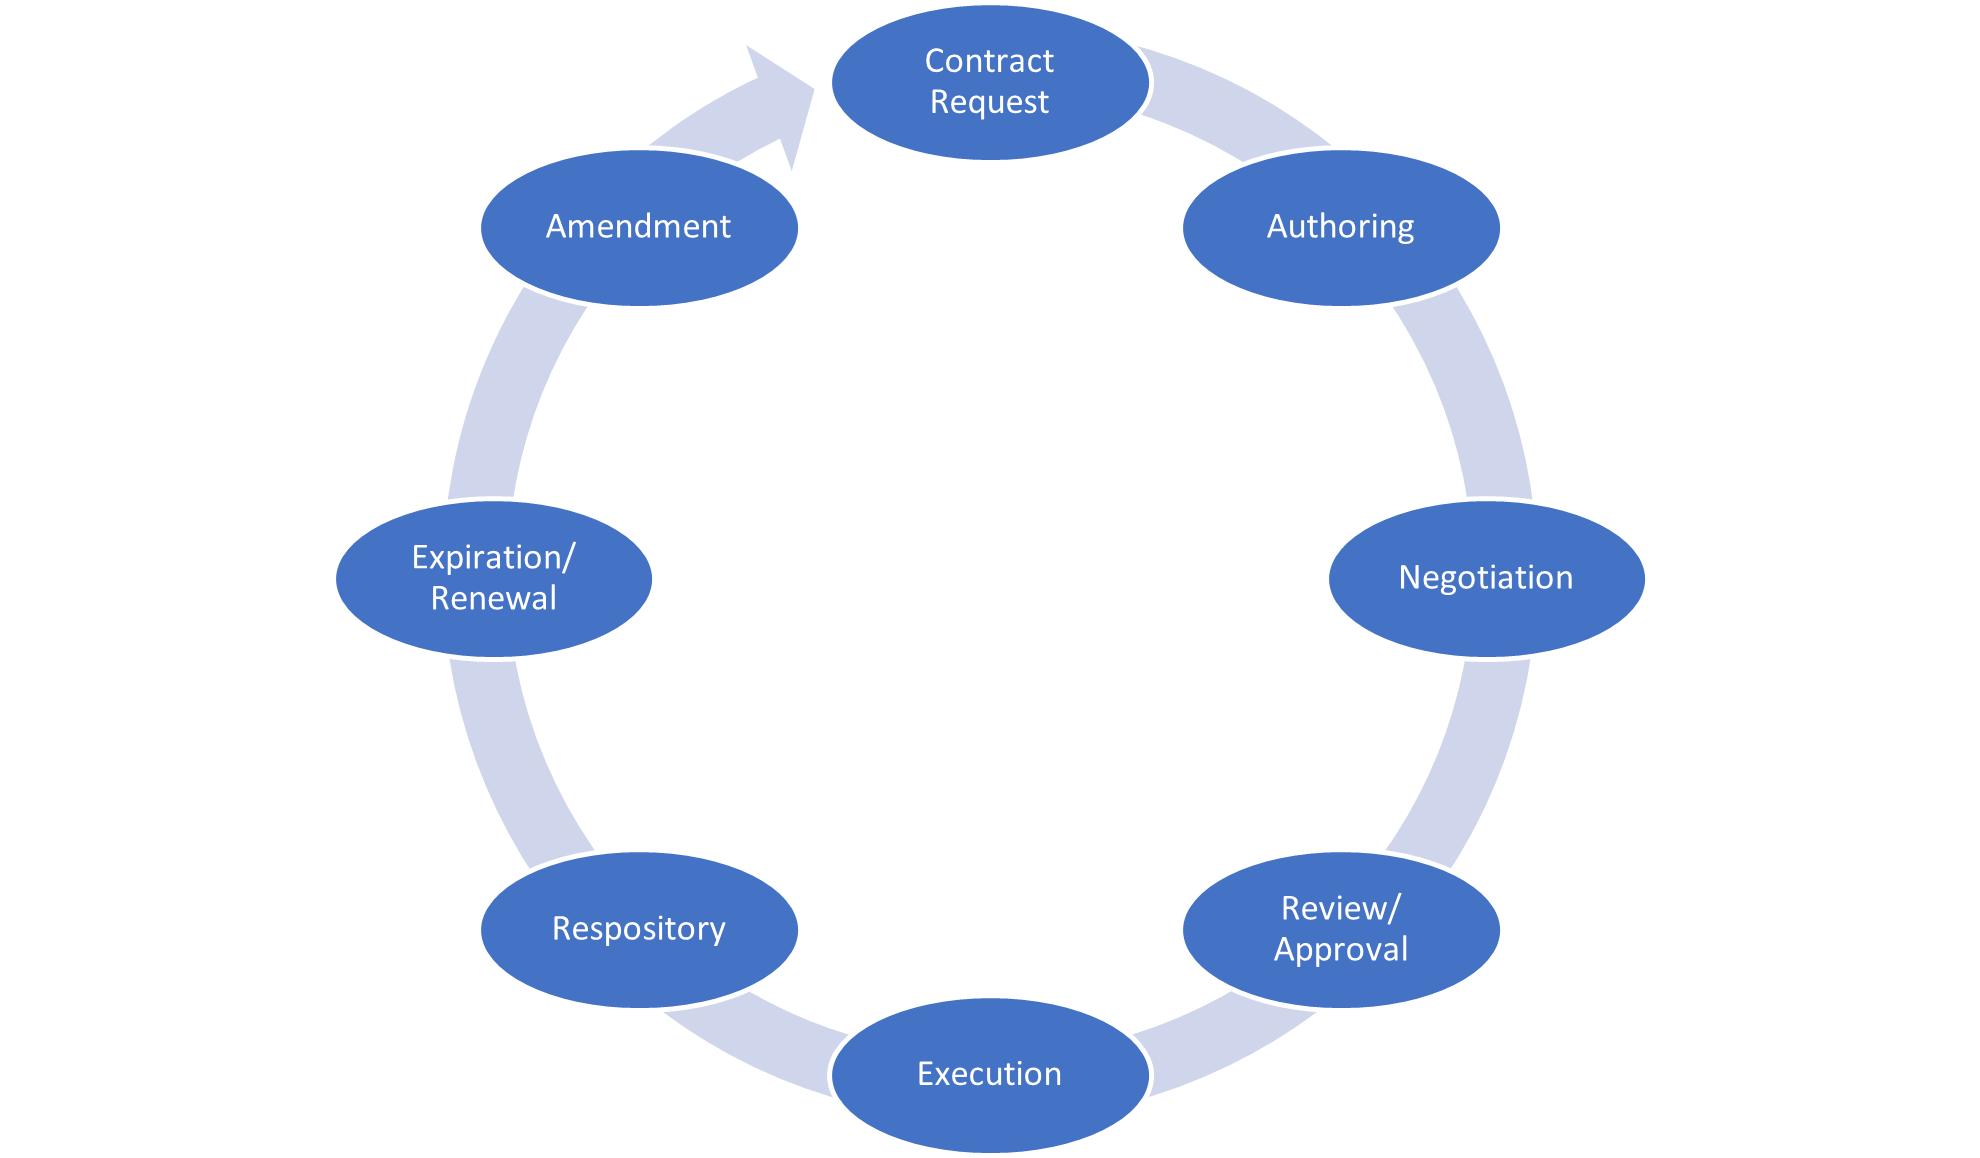 Contract lifecycle management is a continuous cycle from request to amendment